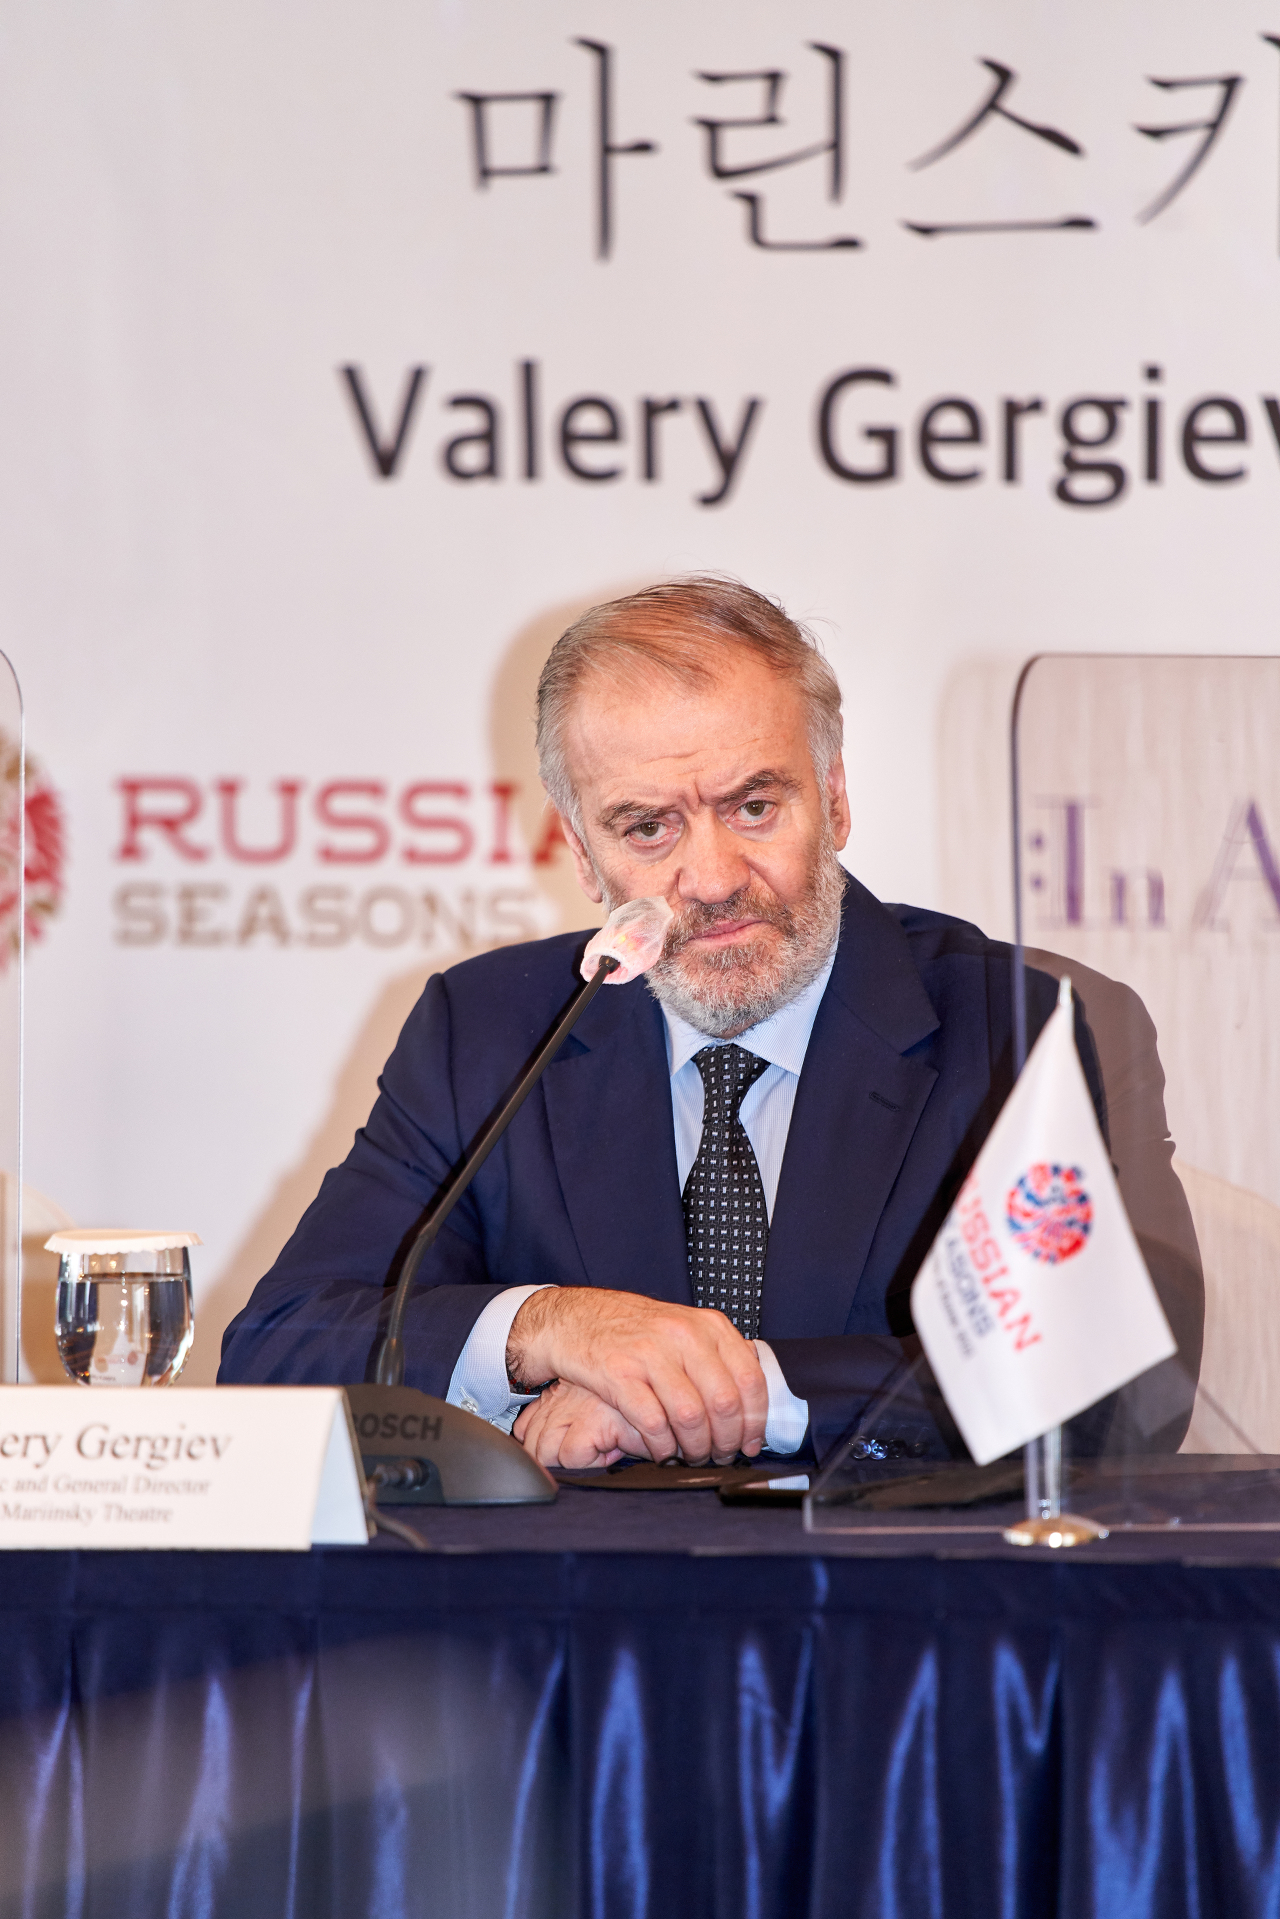 Russian maestro Valery Gergiev attends a press conference in Seoul on Tuesday. (In Arts Production)